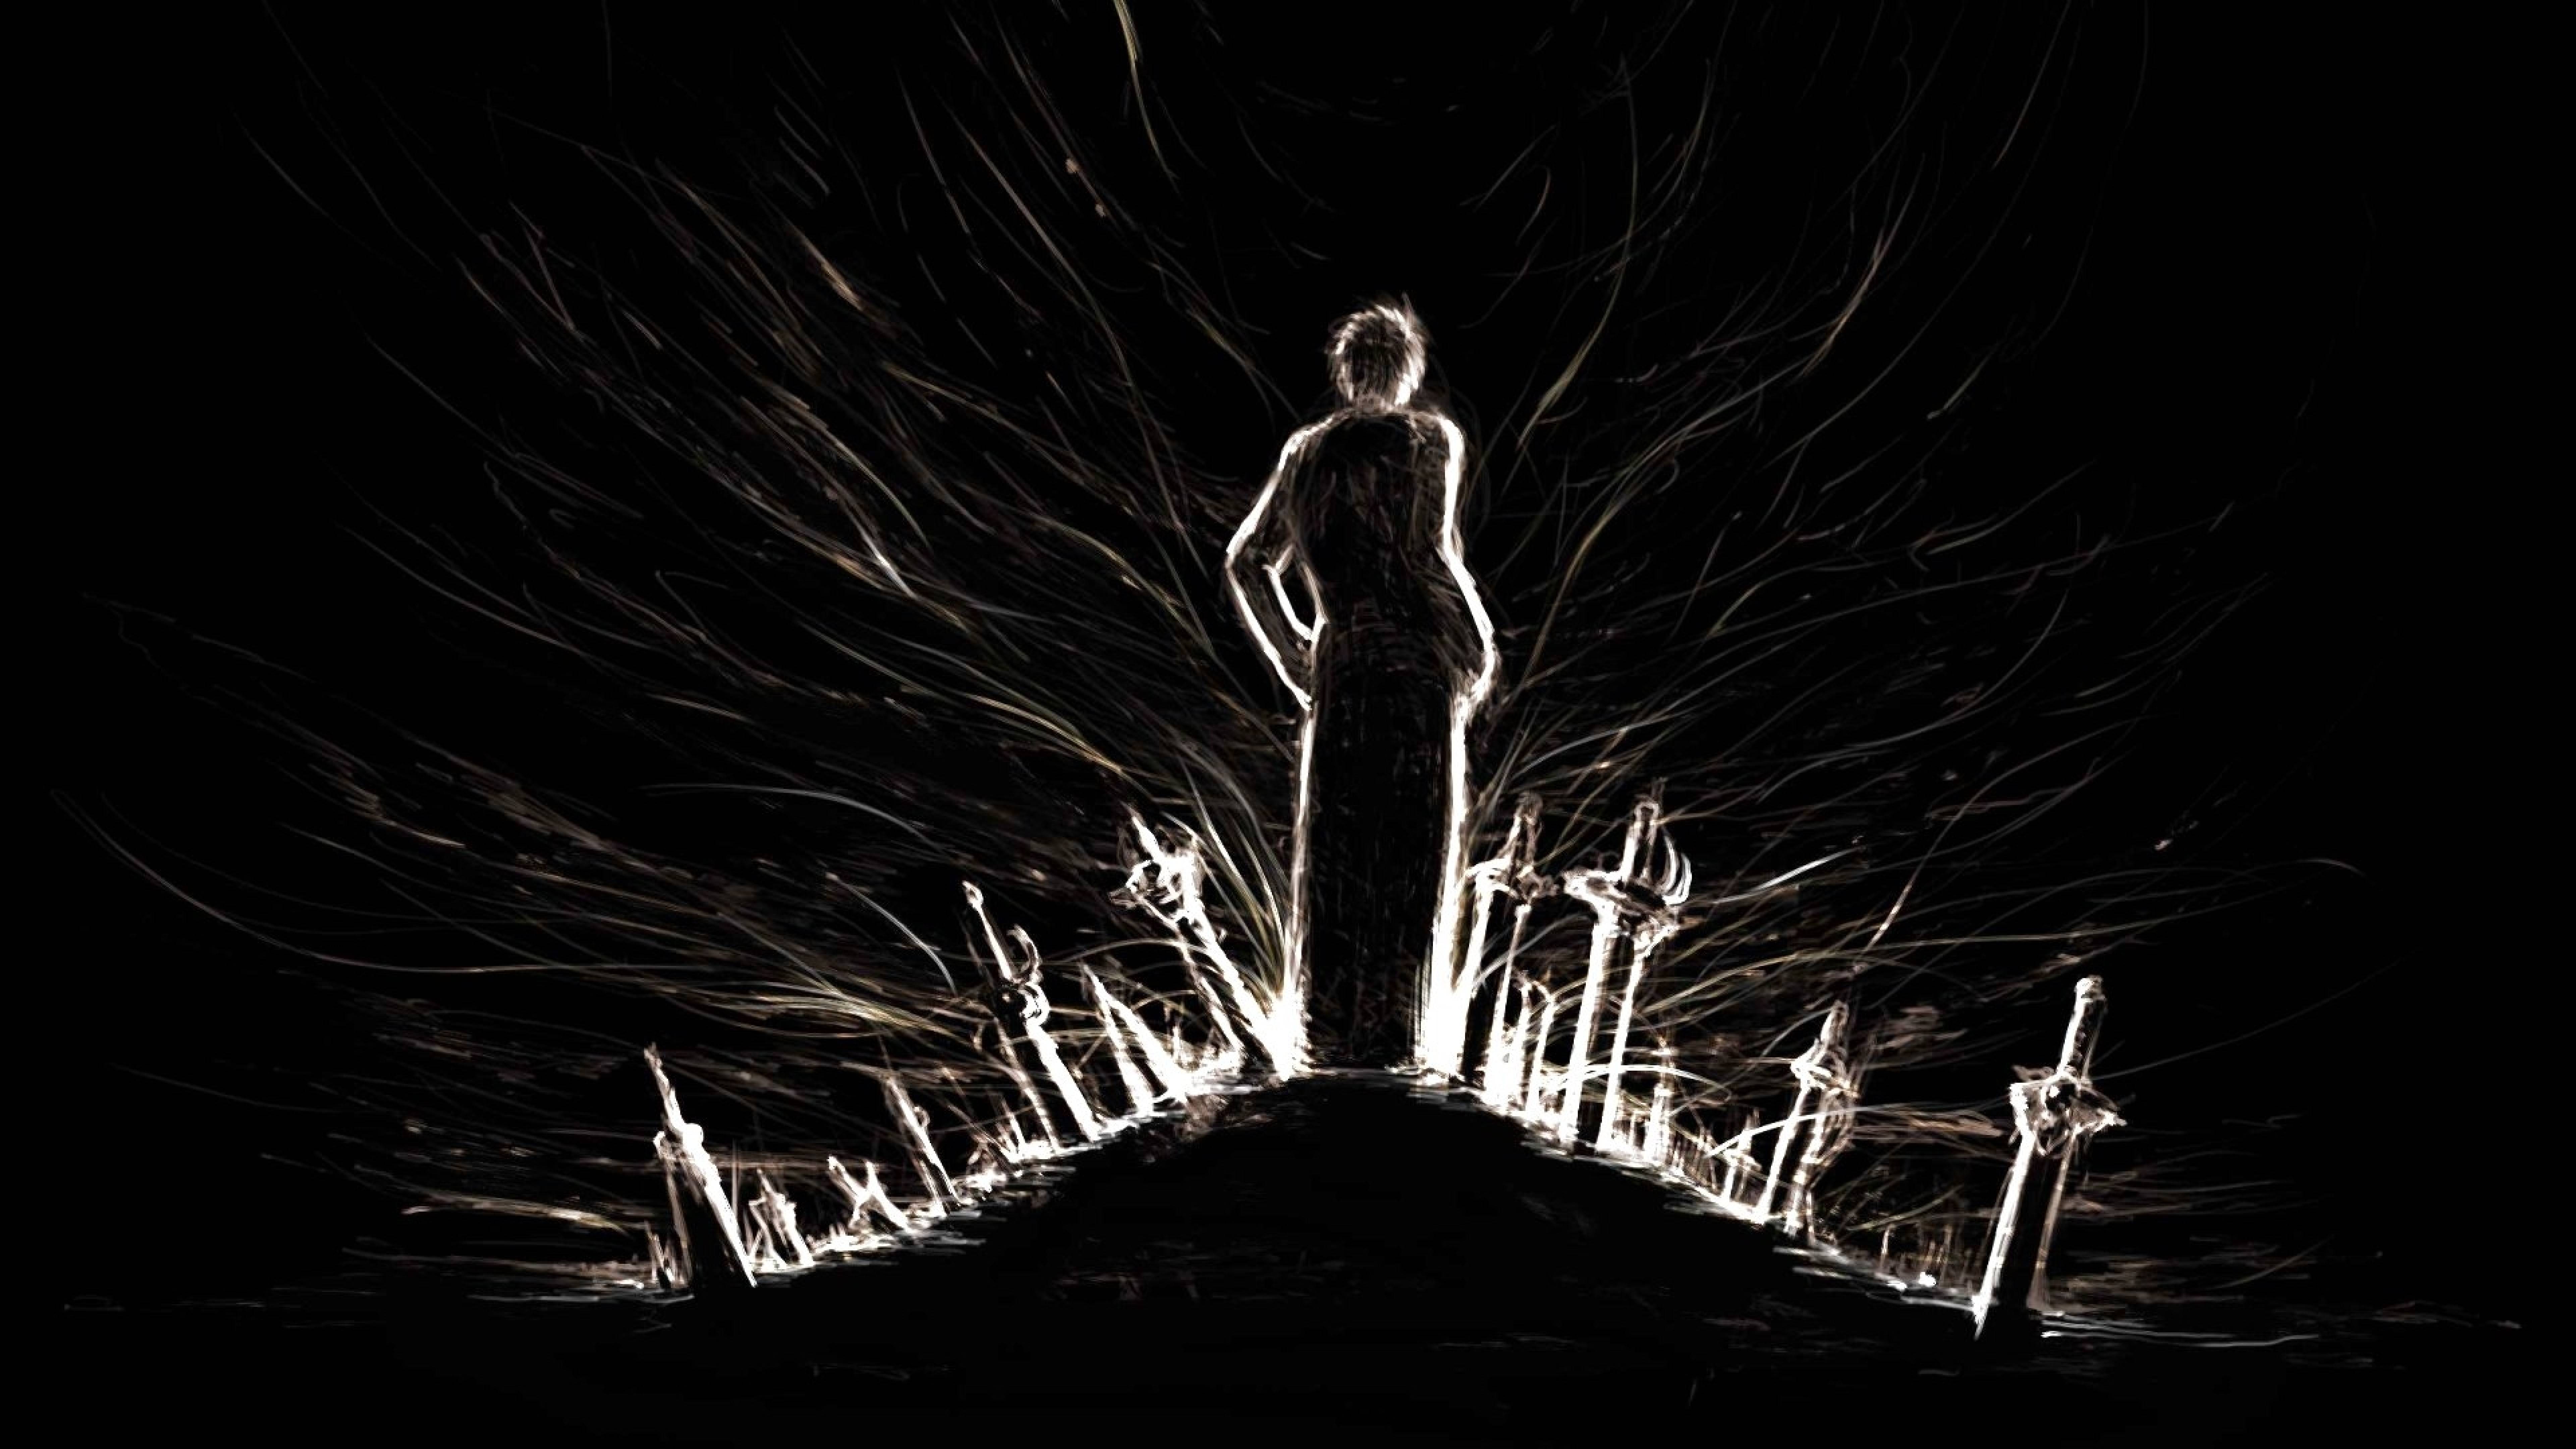 A figure stands on a hill, surrounded by light sabers. - Creepy